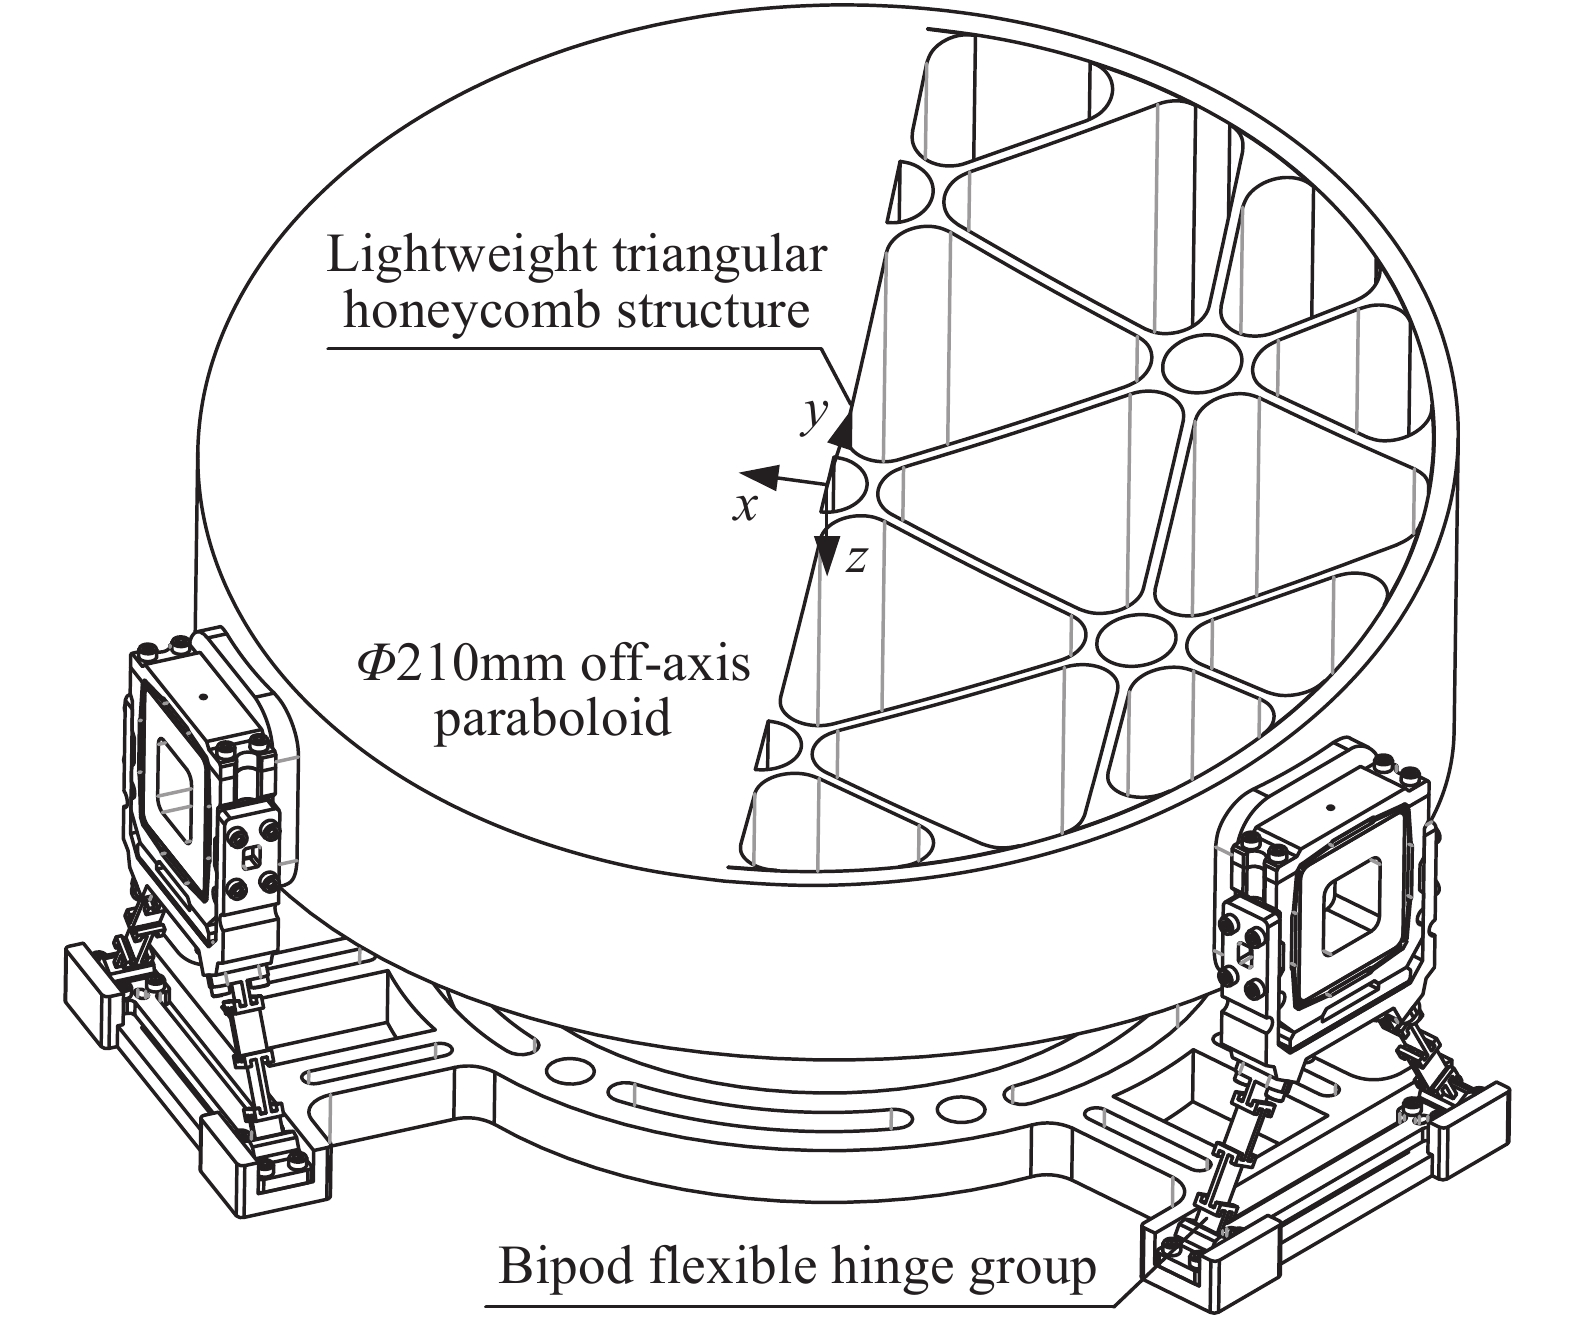 Primary mirror system of space gravitational telescope